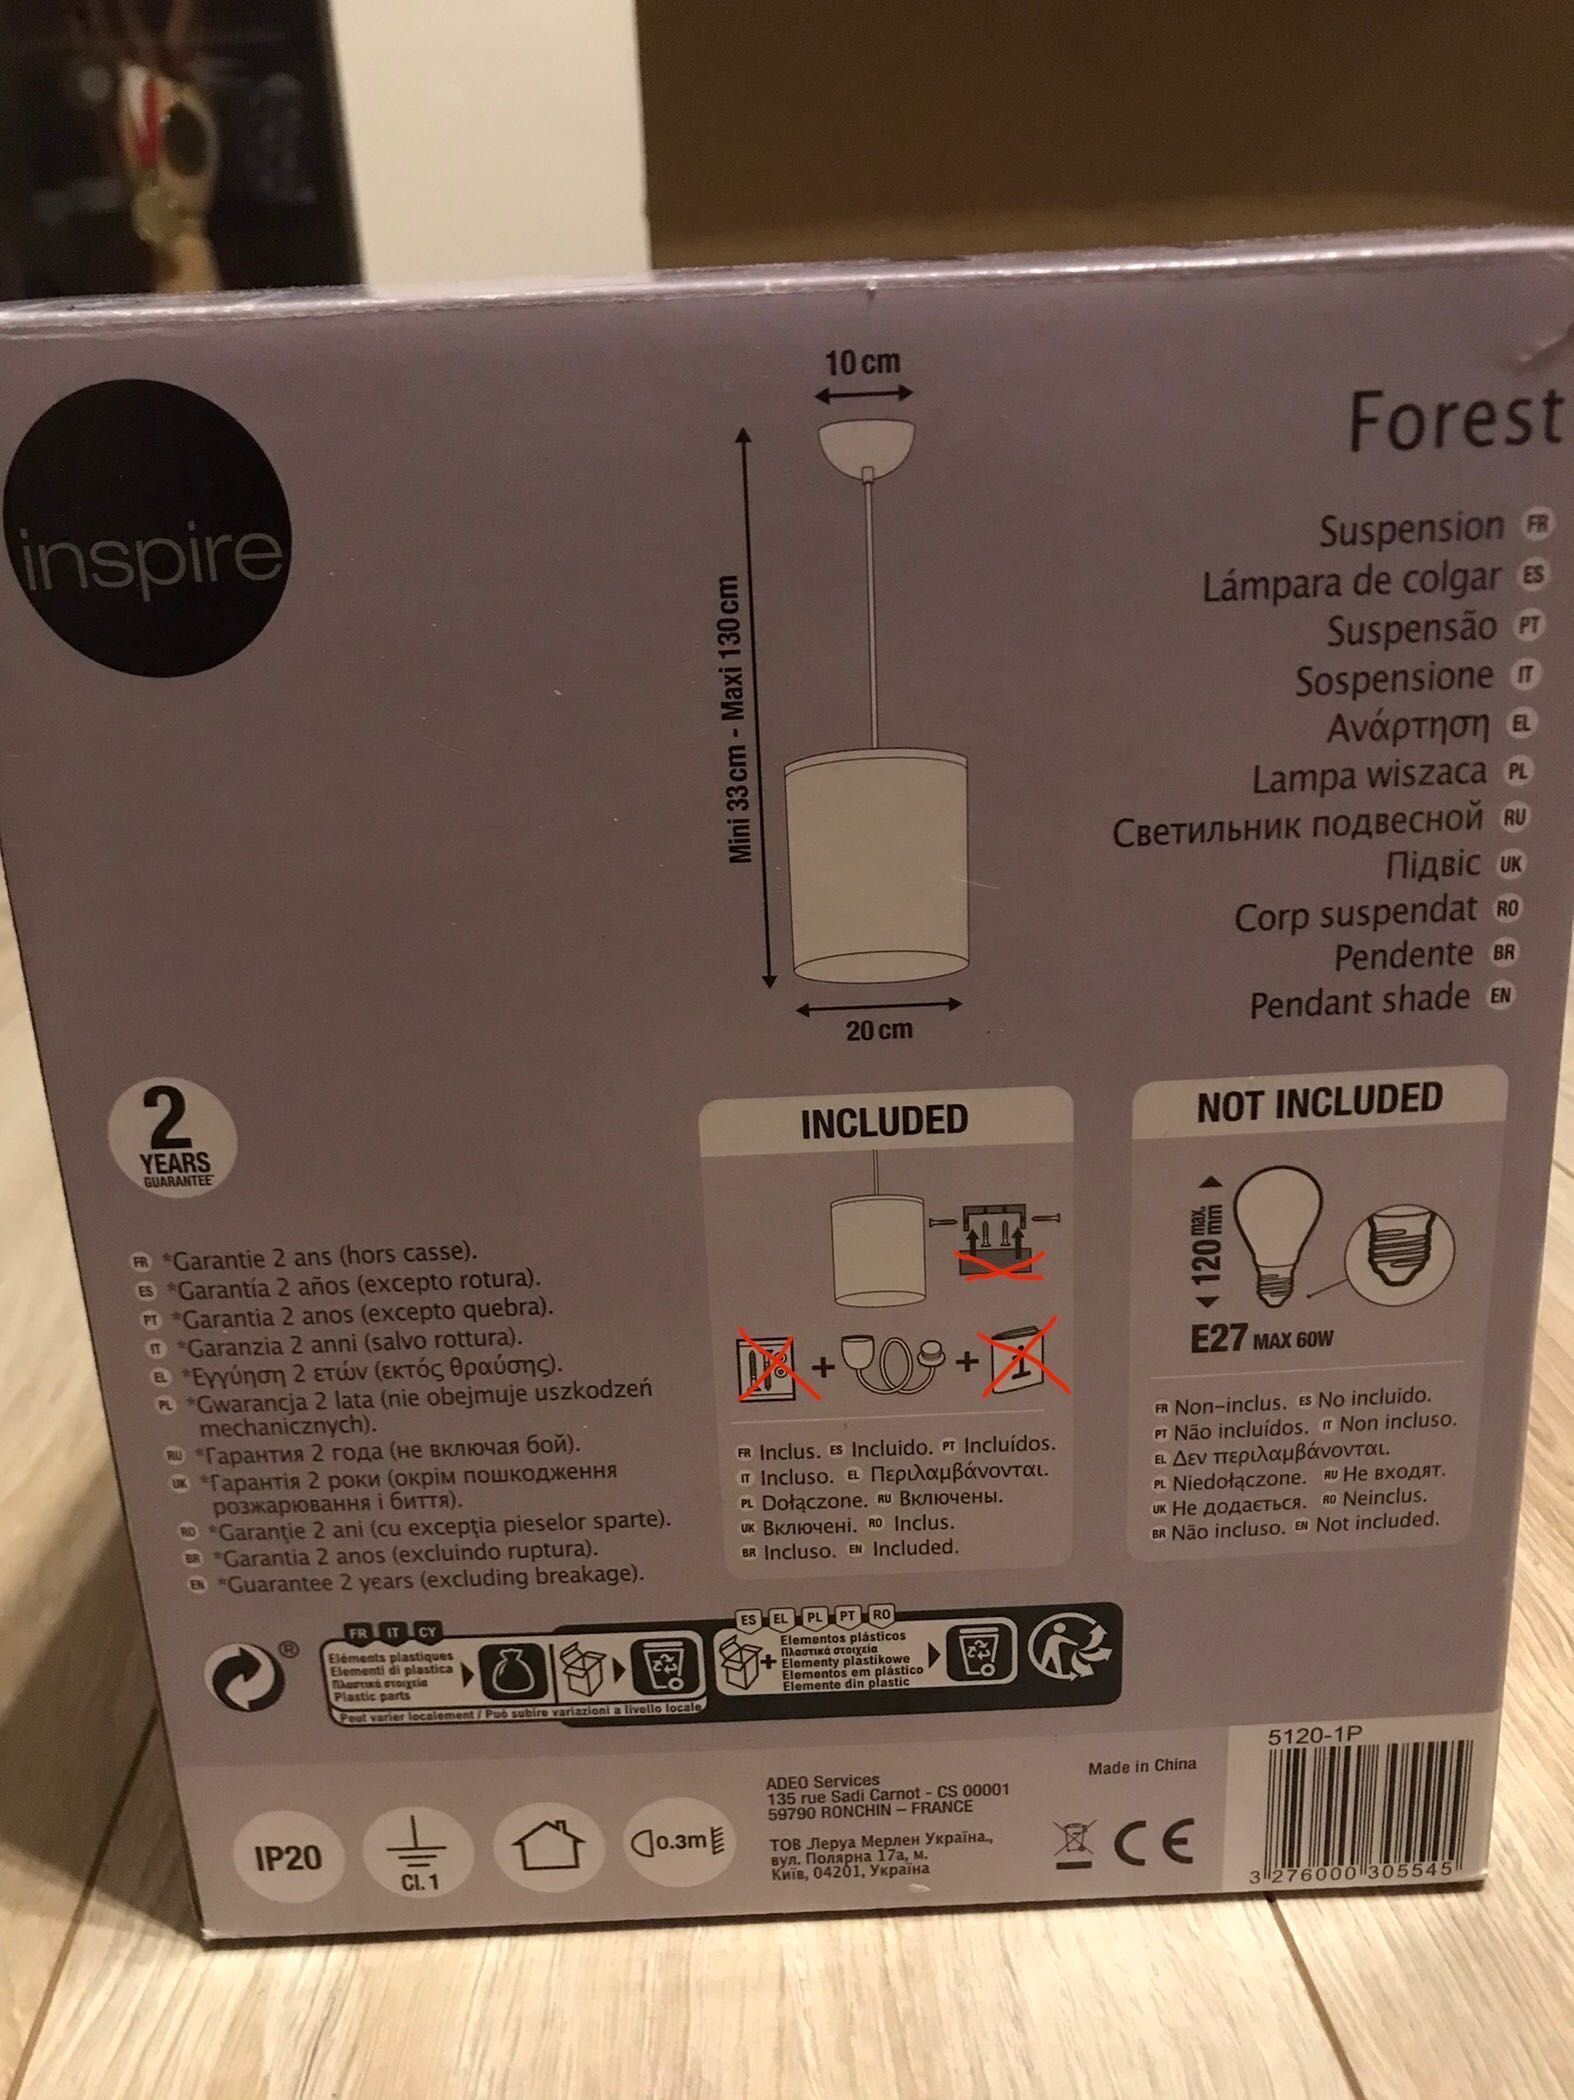 Lampa inspire forest